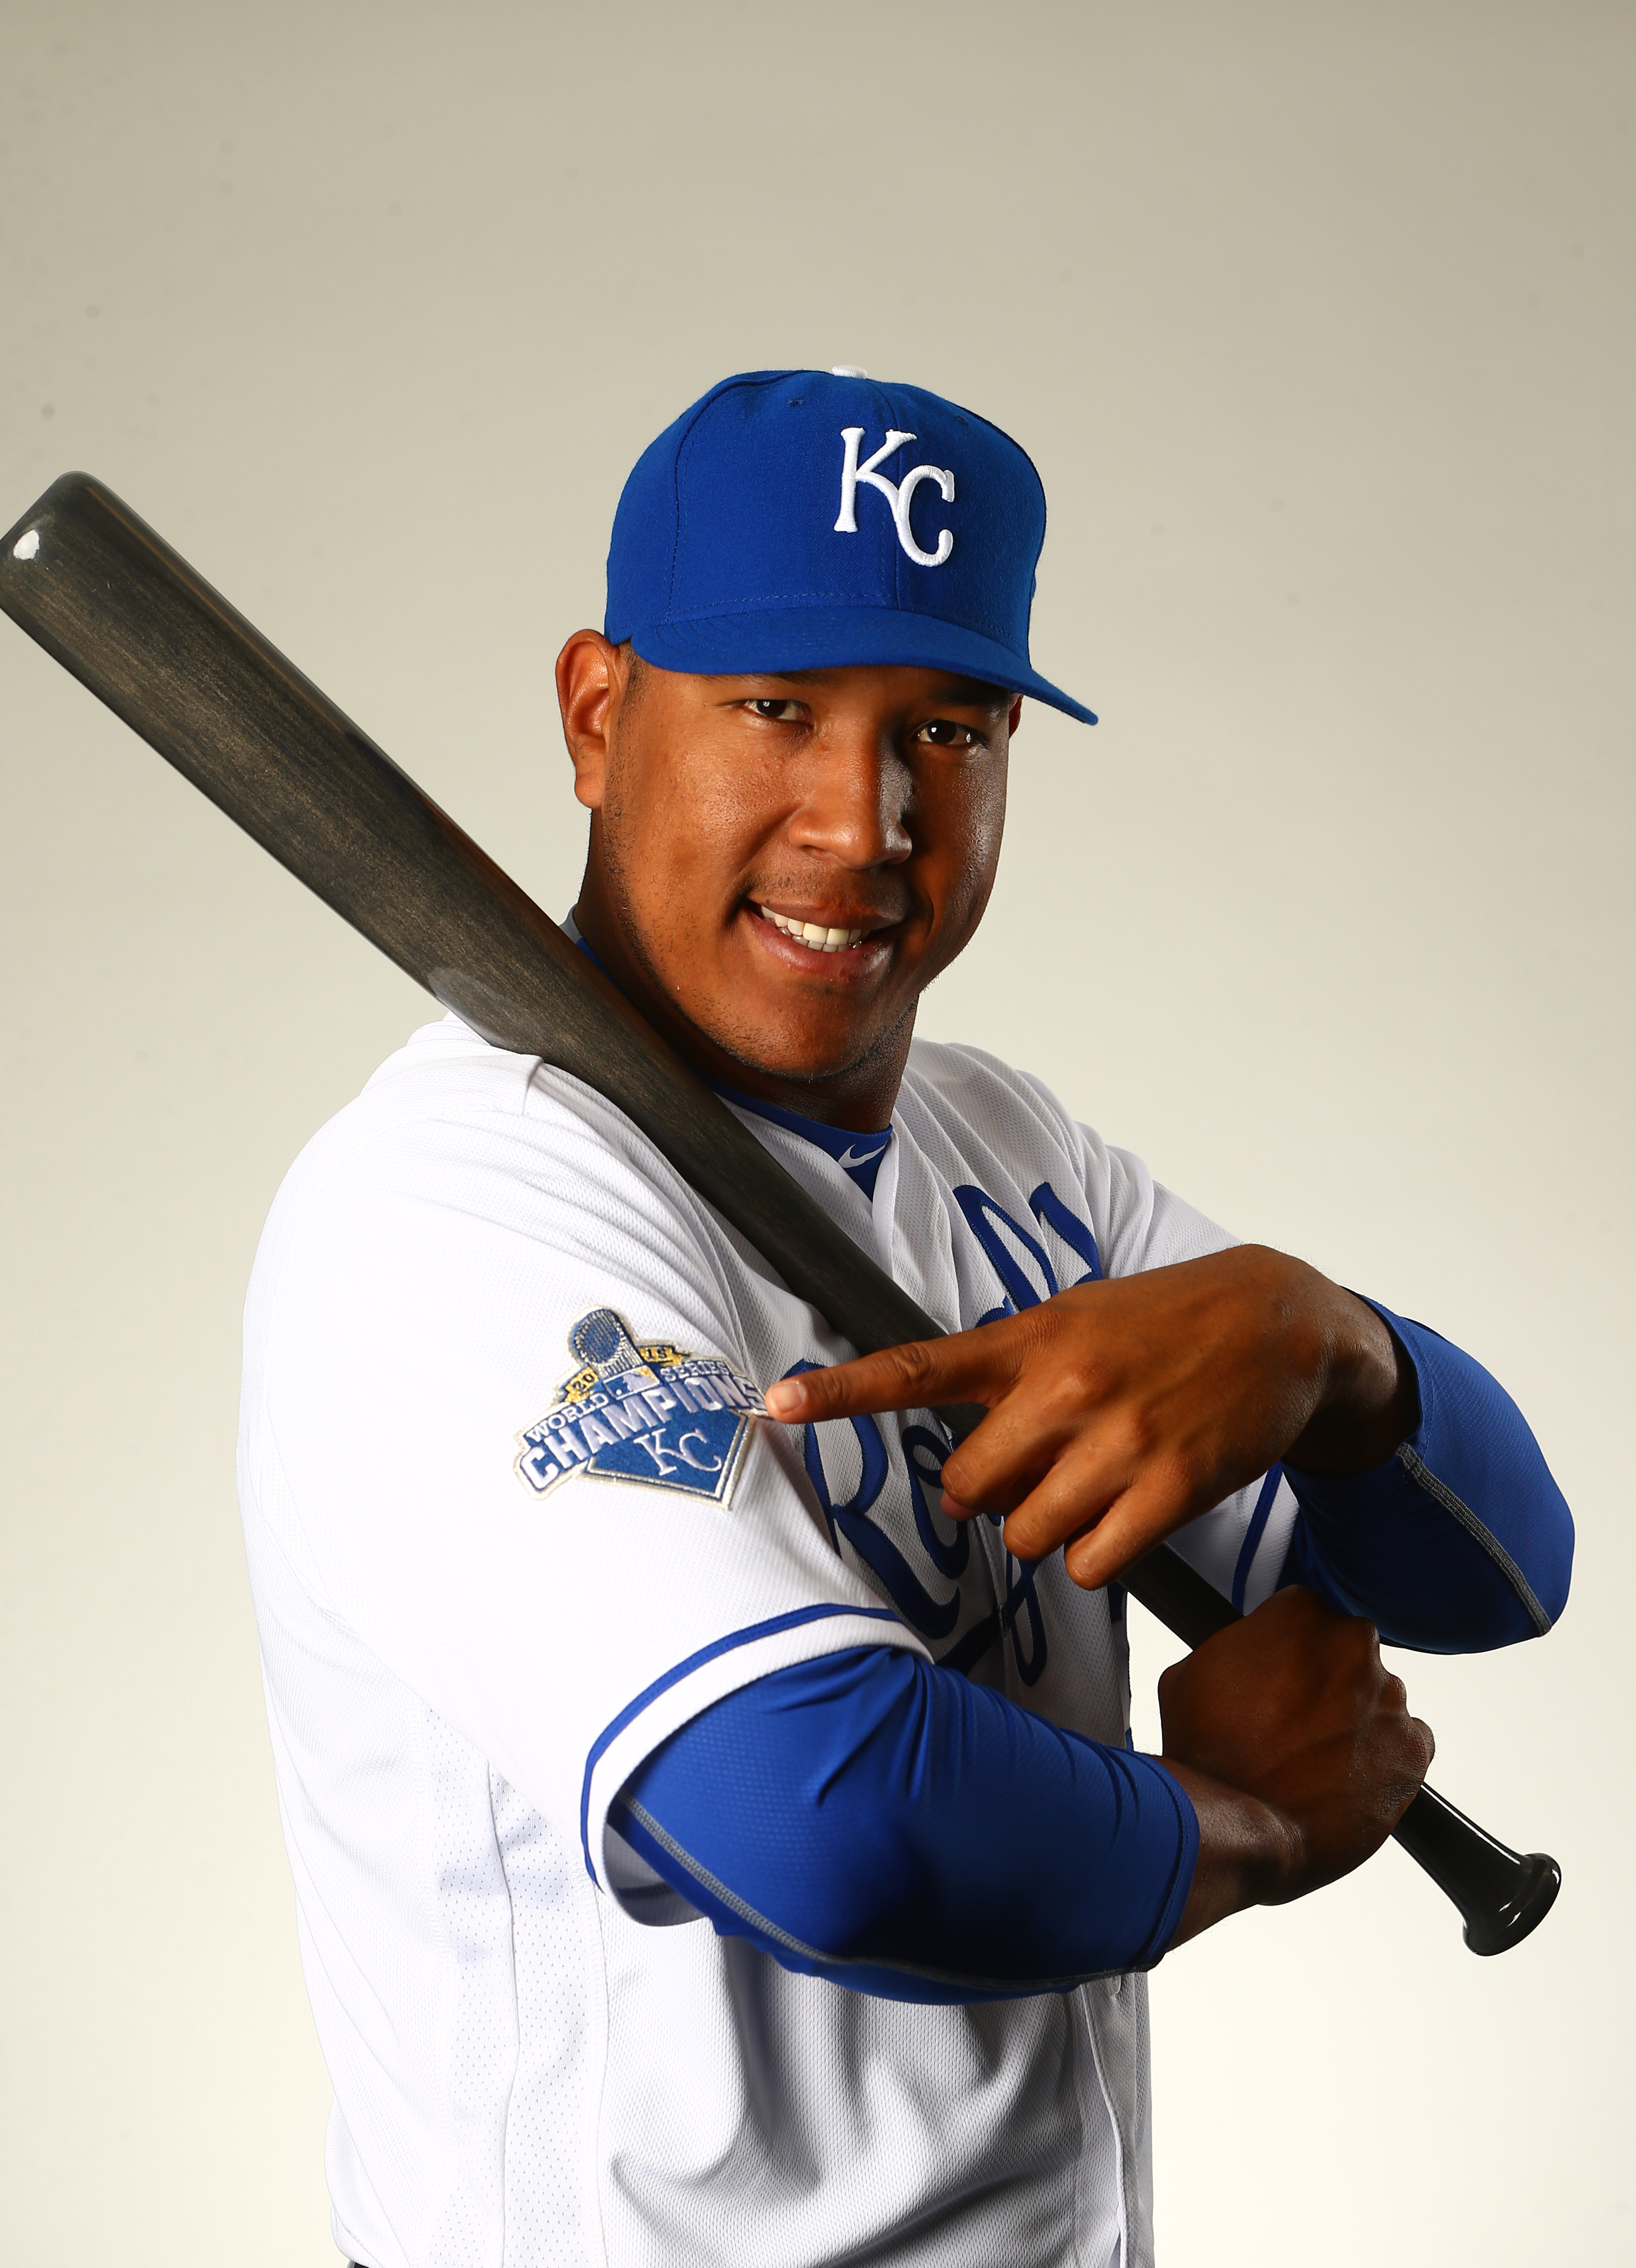 Salvador Perez was willing to accept a trade to the right team